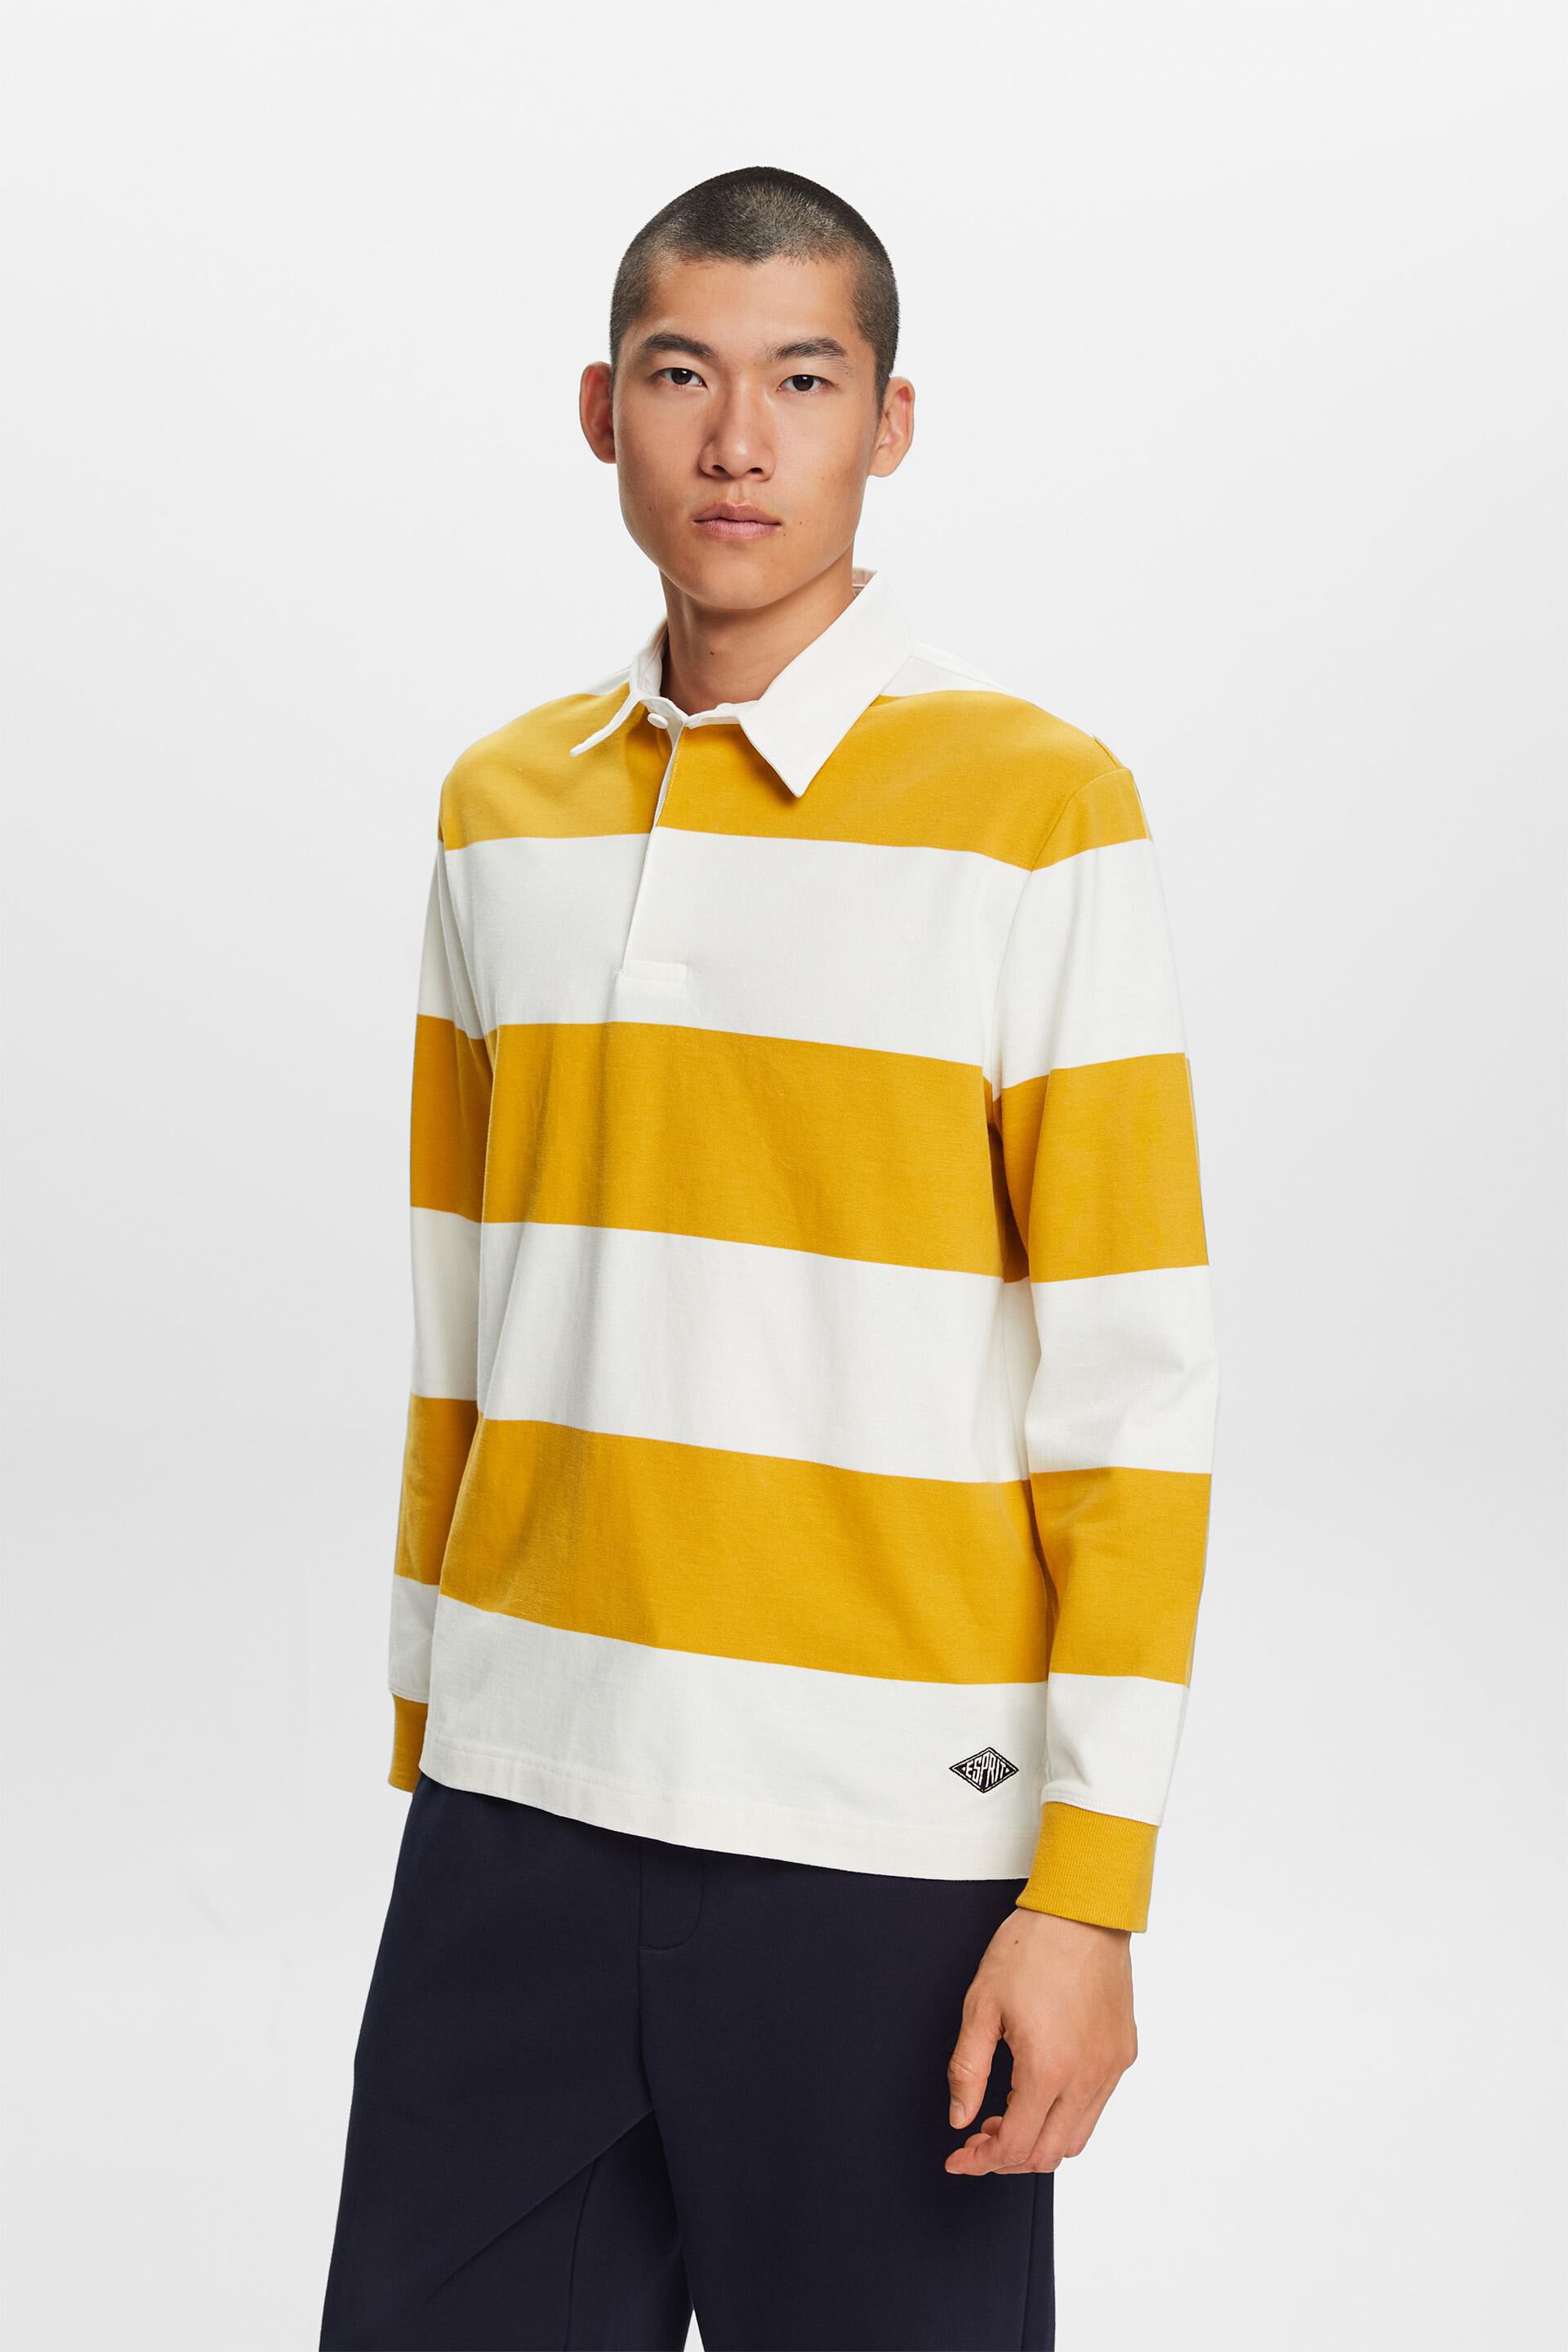 ESPRIT - Striped Rugby Shirt at our online shop